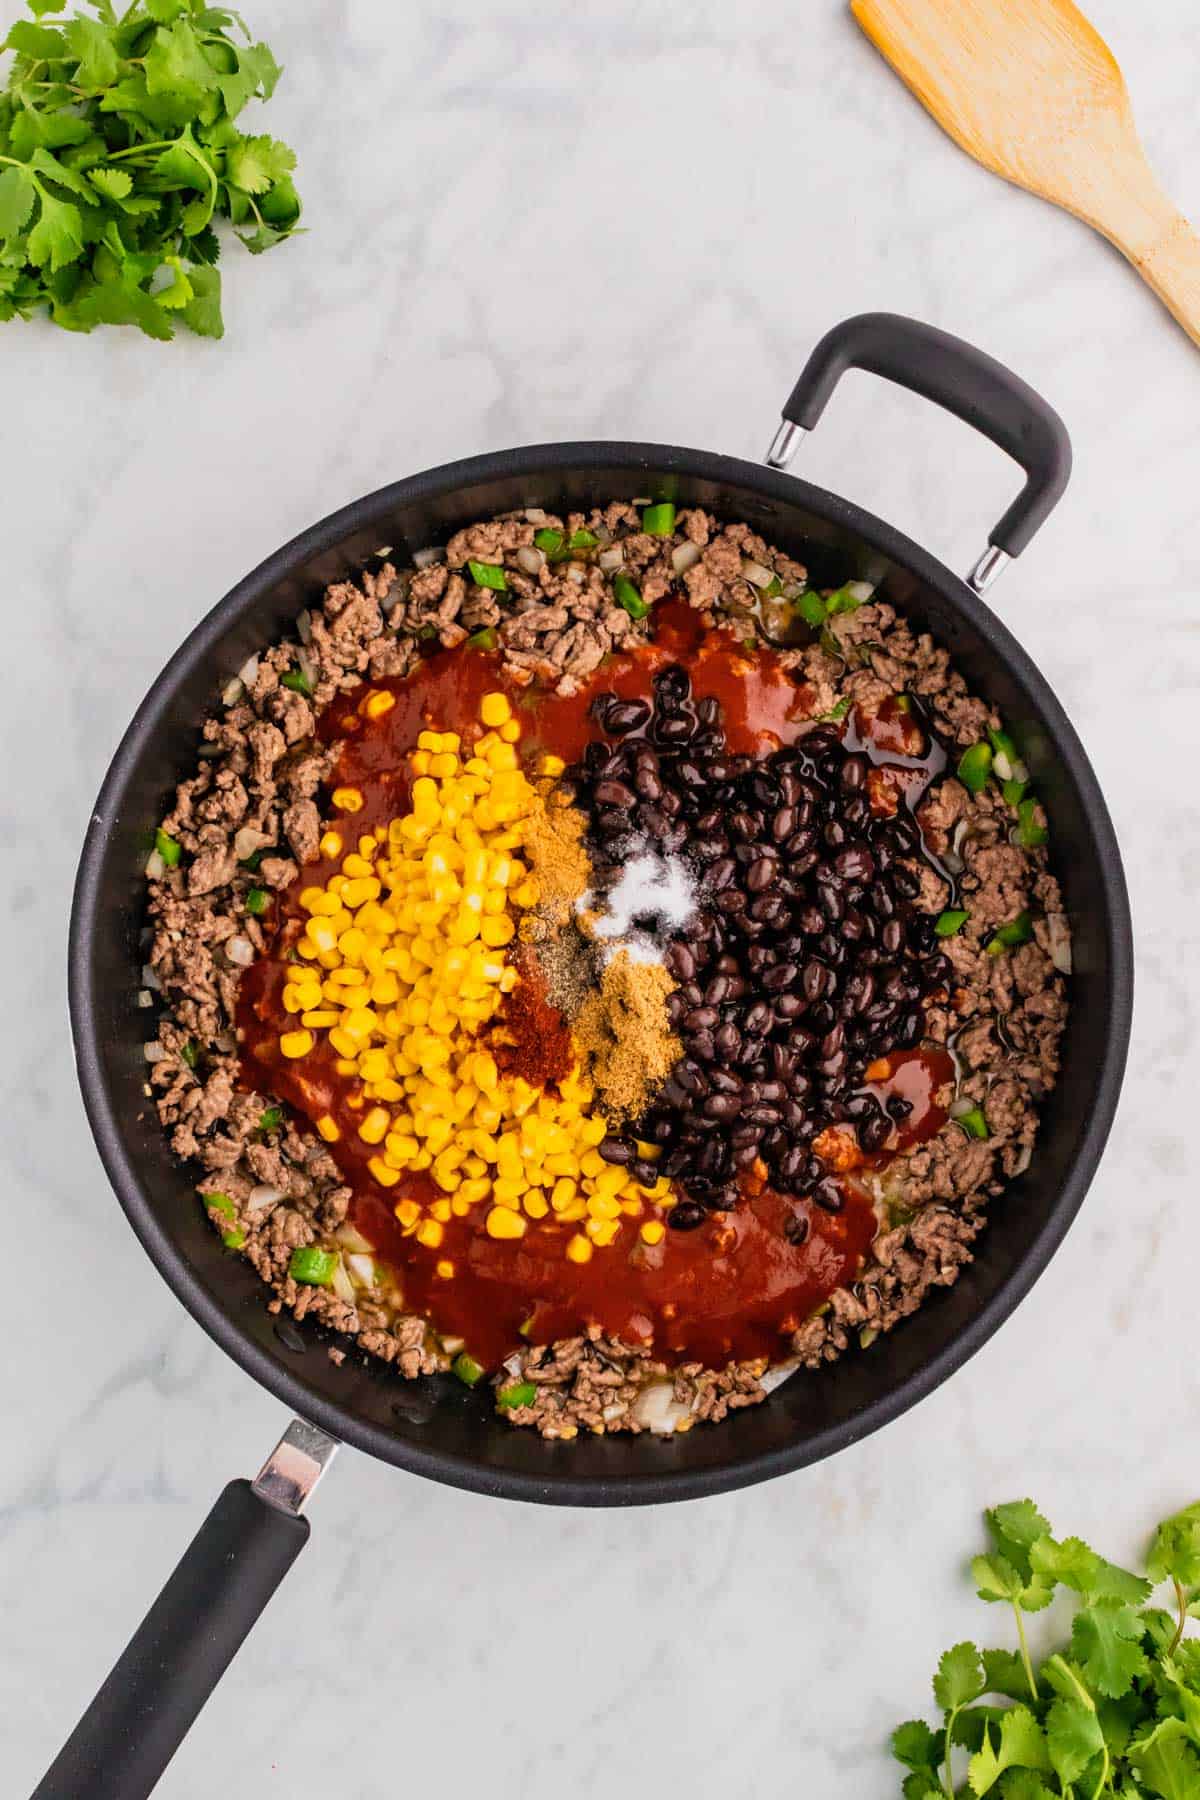 corn, black beans, spices and enchilada sauce on top of cooked ground beef in a skillet